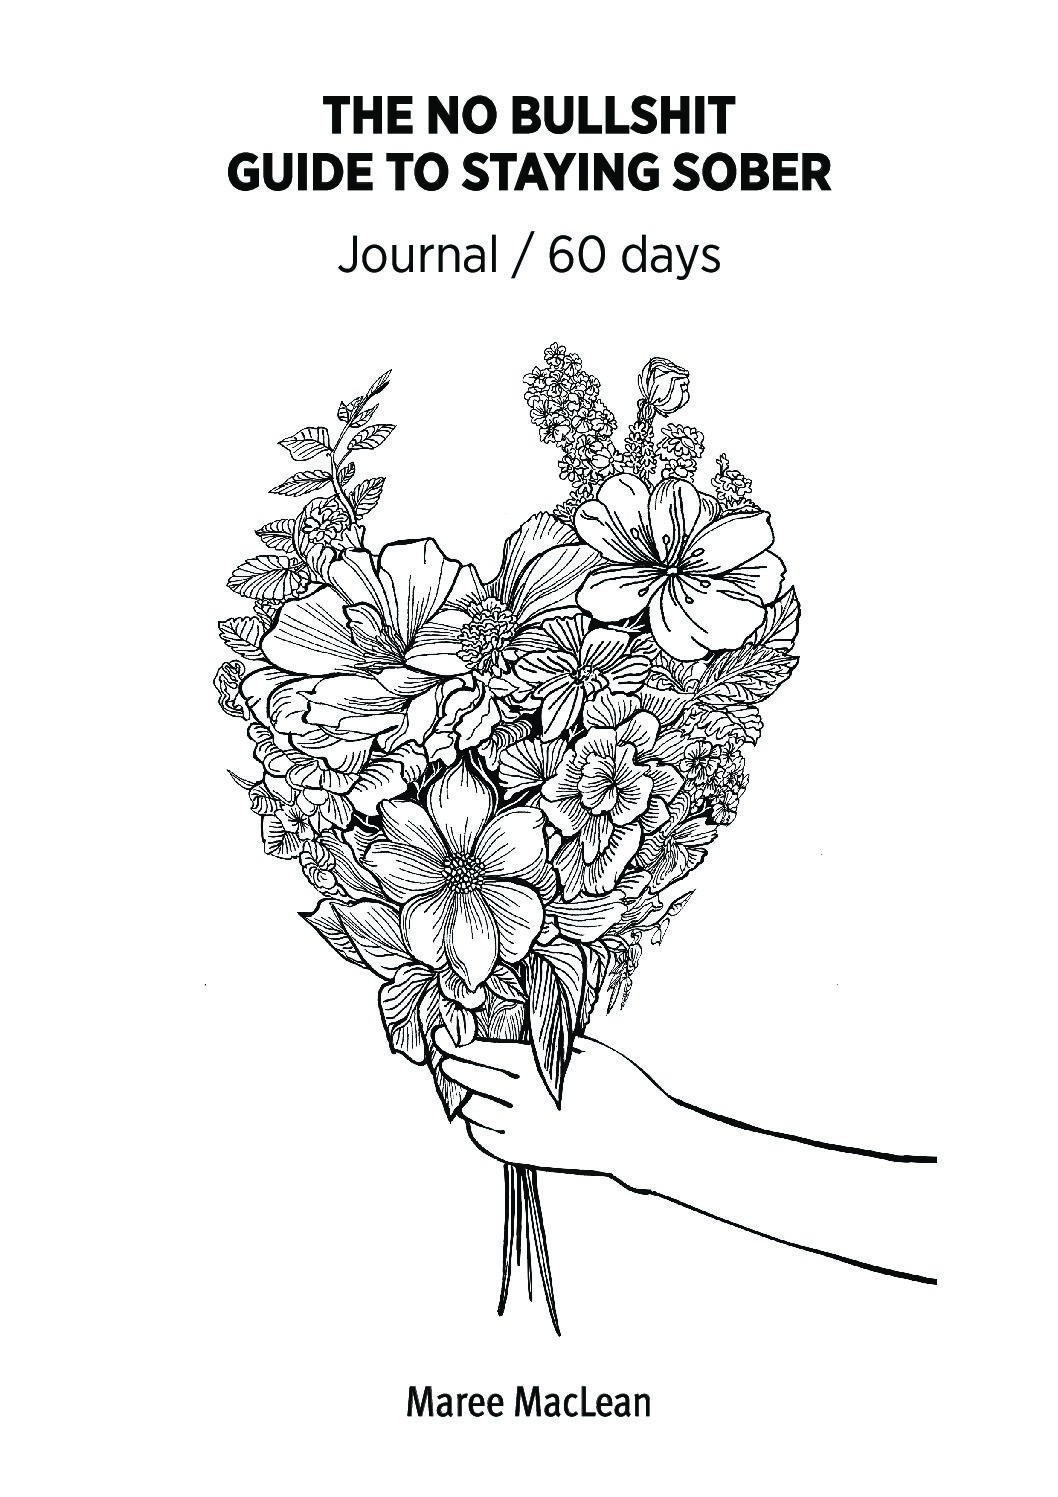 Journal to Staying Sober (Heart) - eJournal or self print